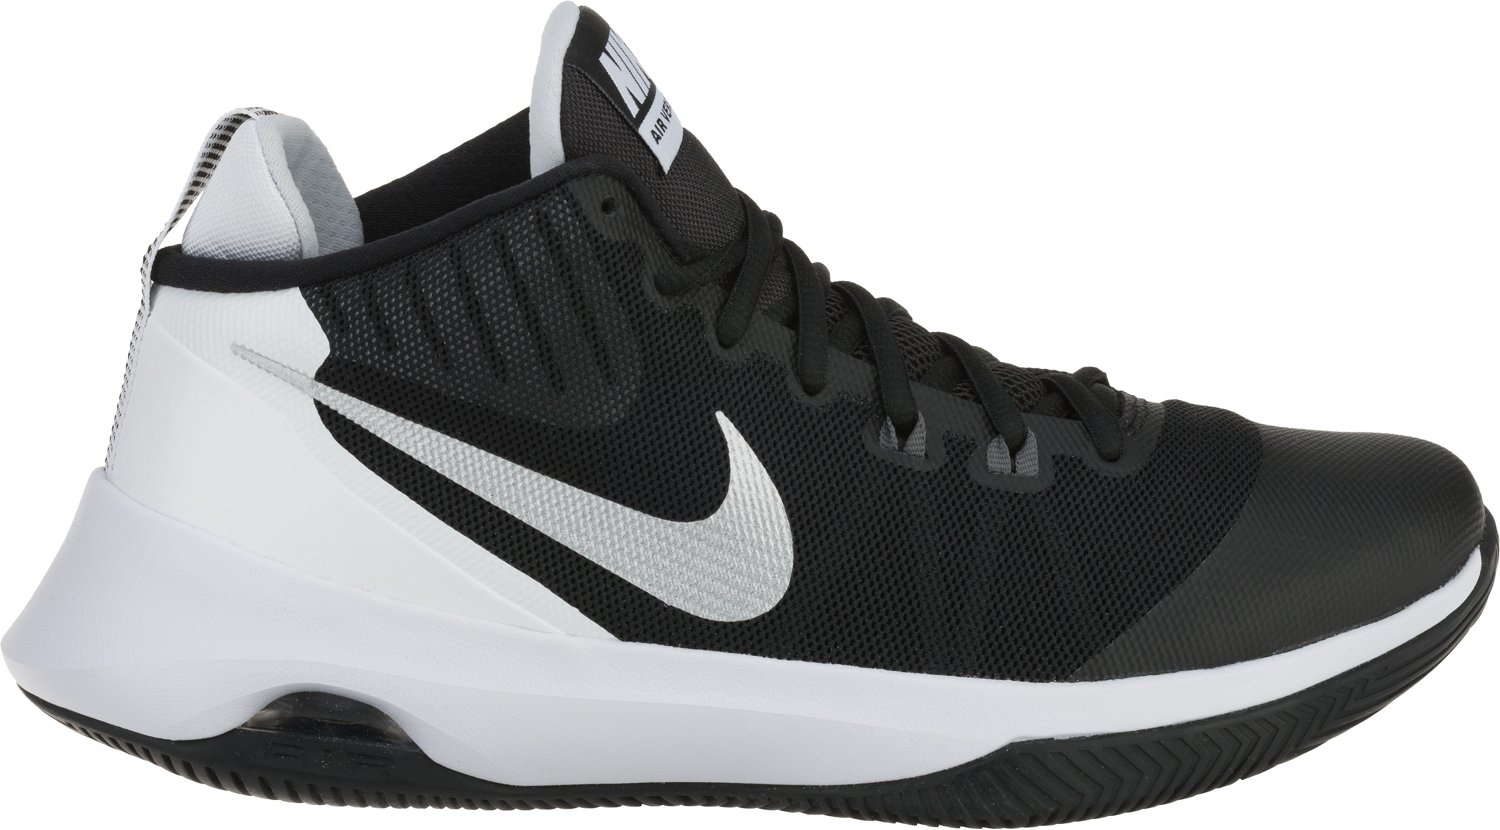 Women's Basketball Shoes | Academy Sports + Outdoors